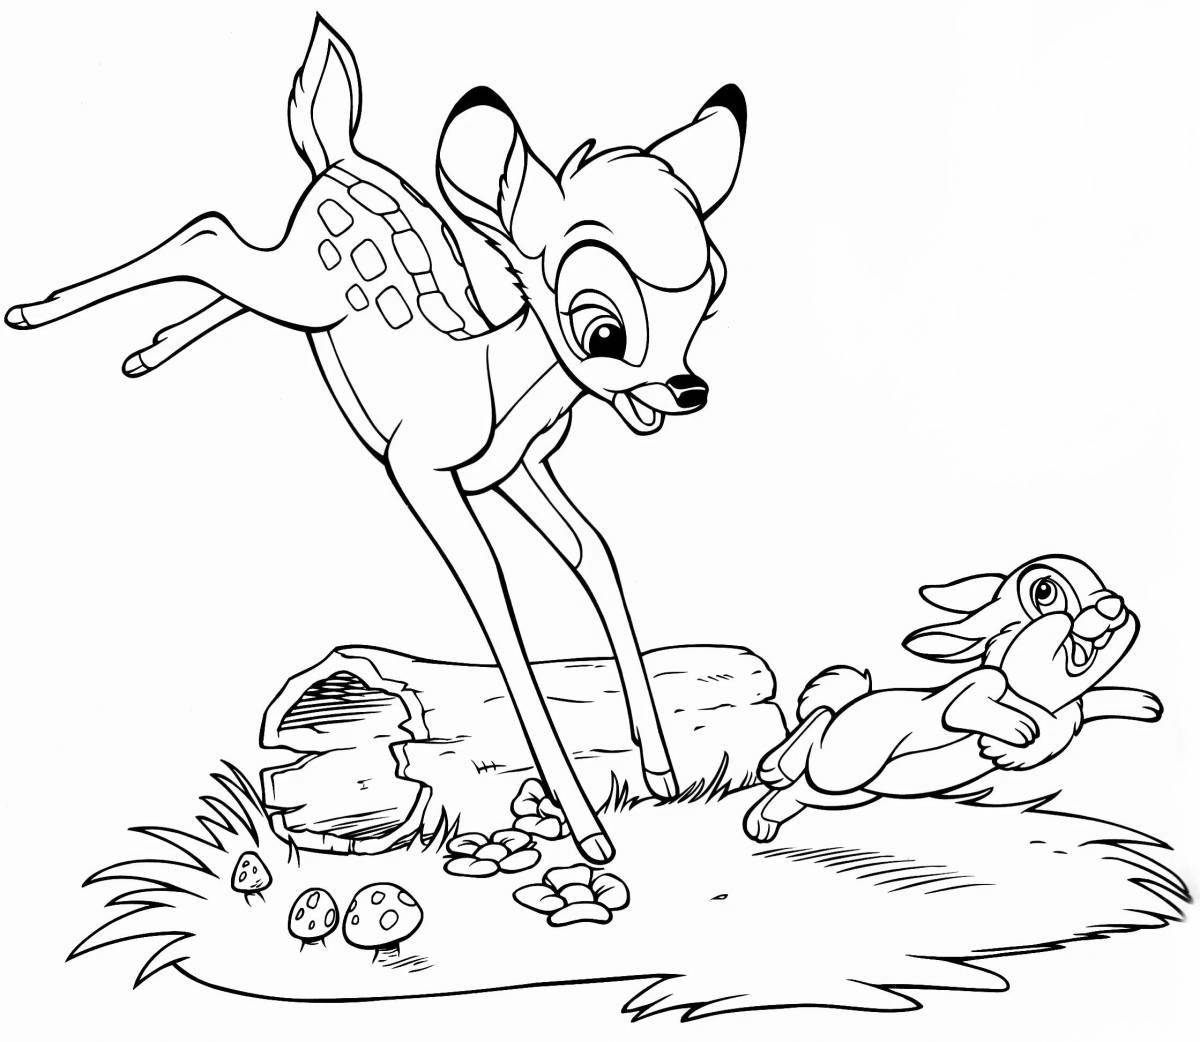 Colorful bambi fawn coloring page